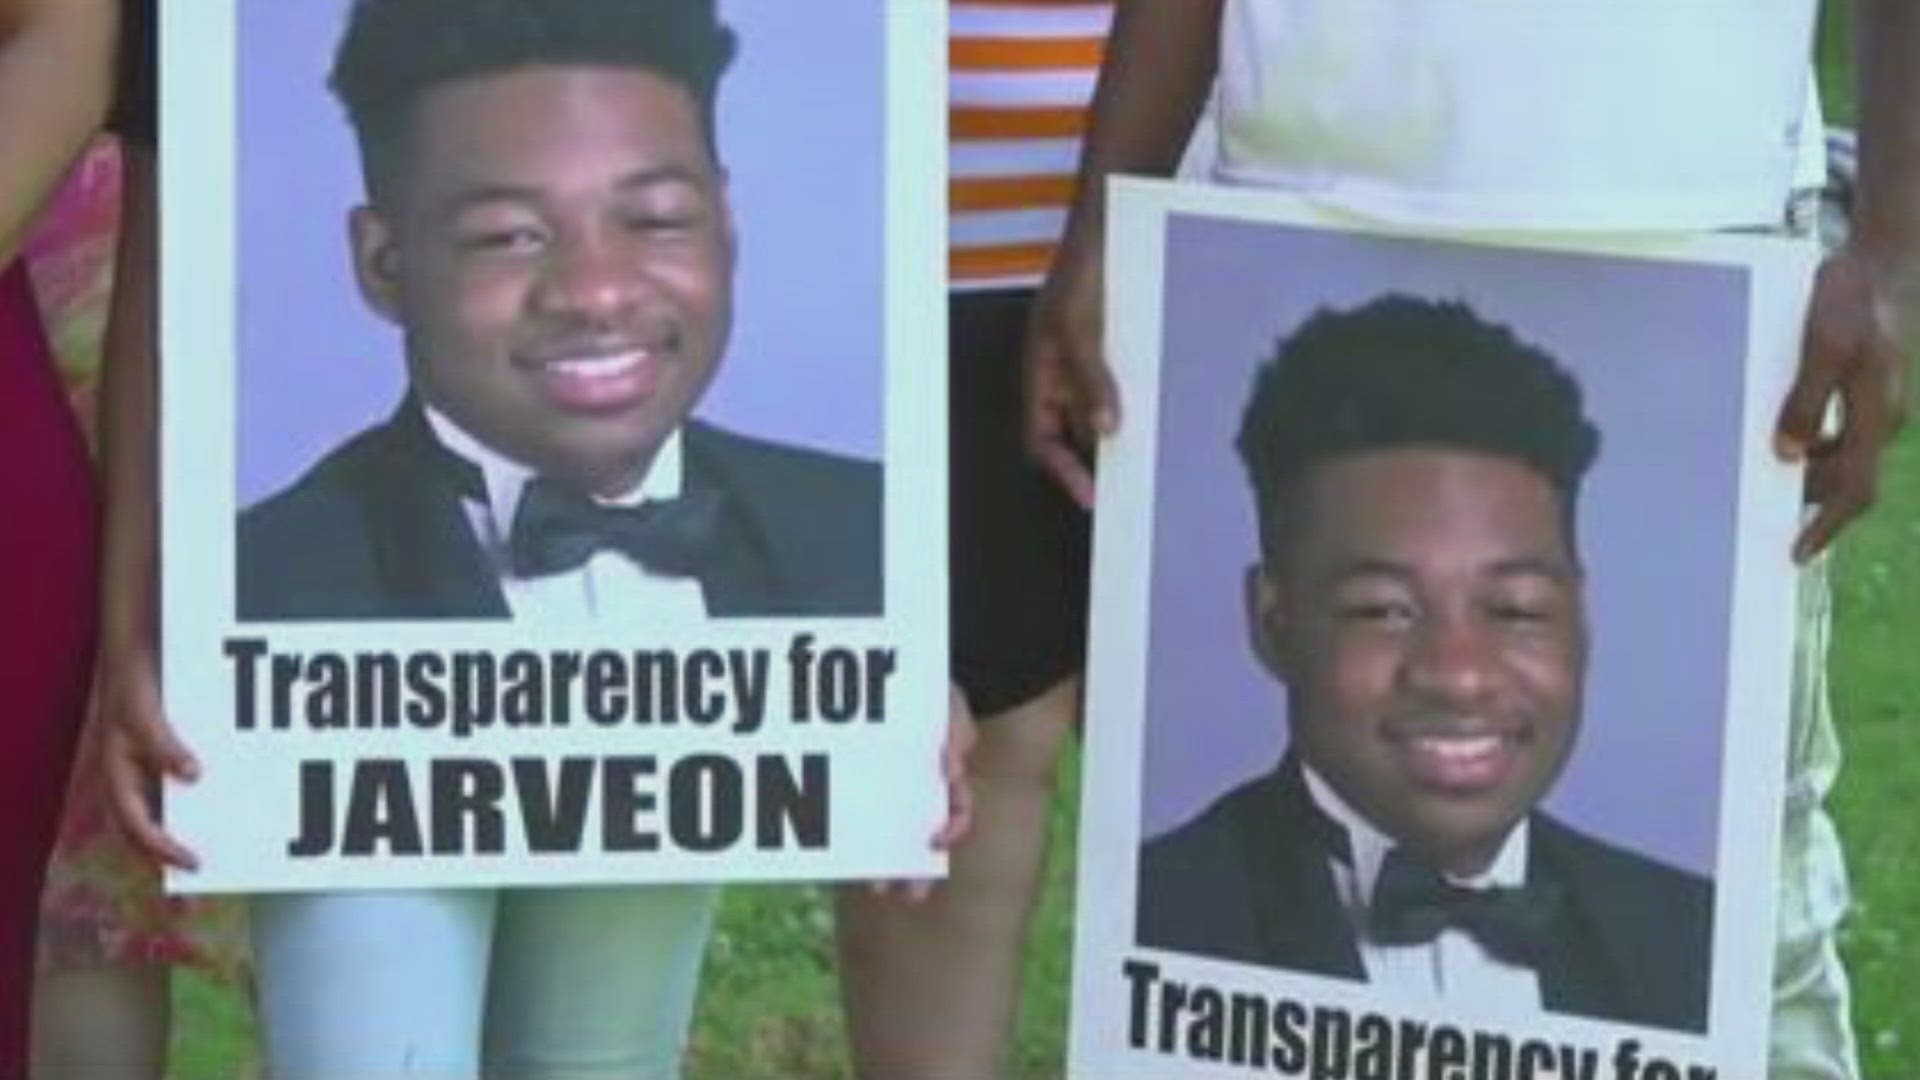 21-year-old Jarveon Hudspeth was shot and killed by a Shelby County Sheriff's deputy during a traffic stop on June 24, 2023.